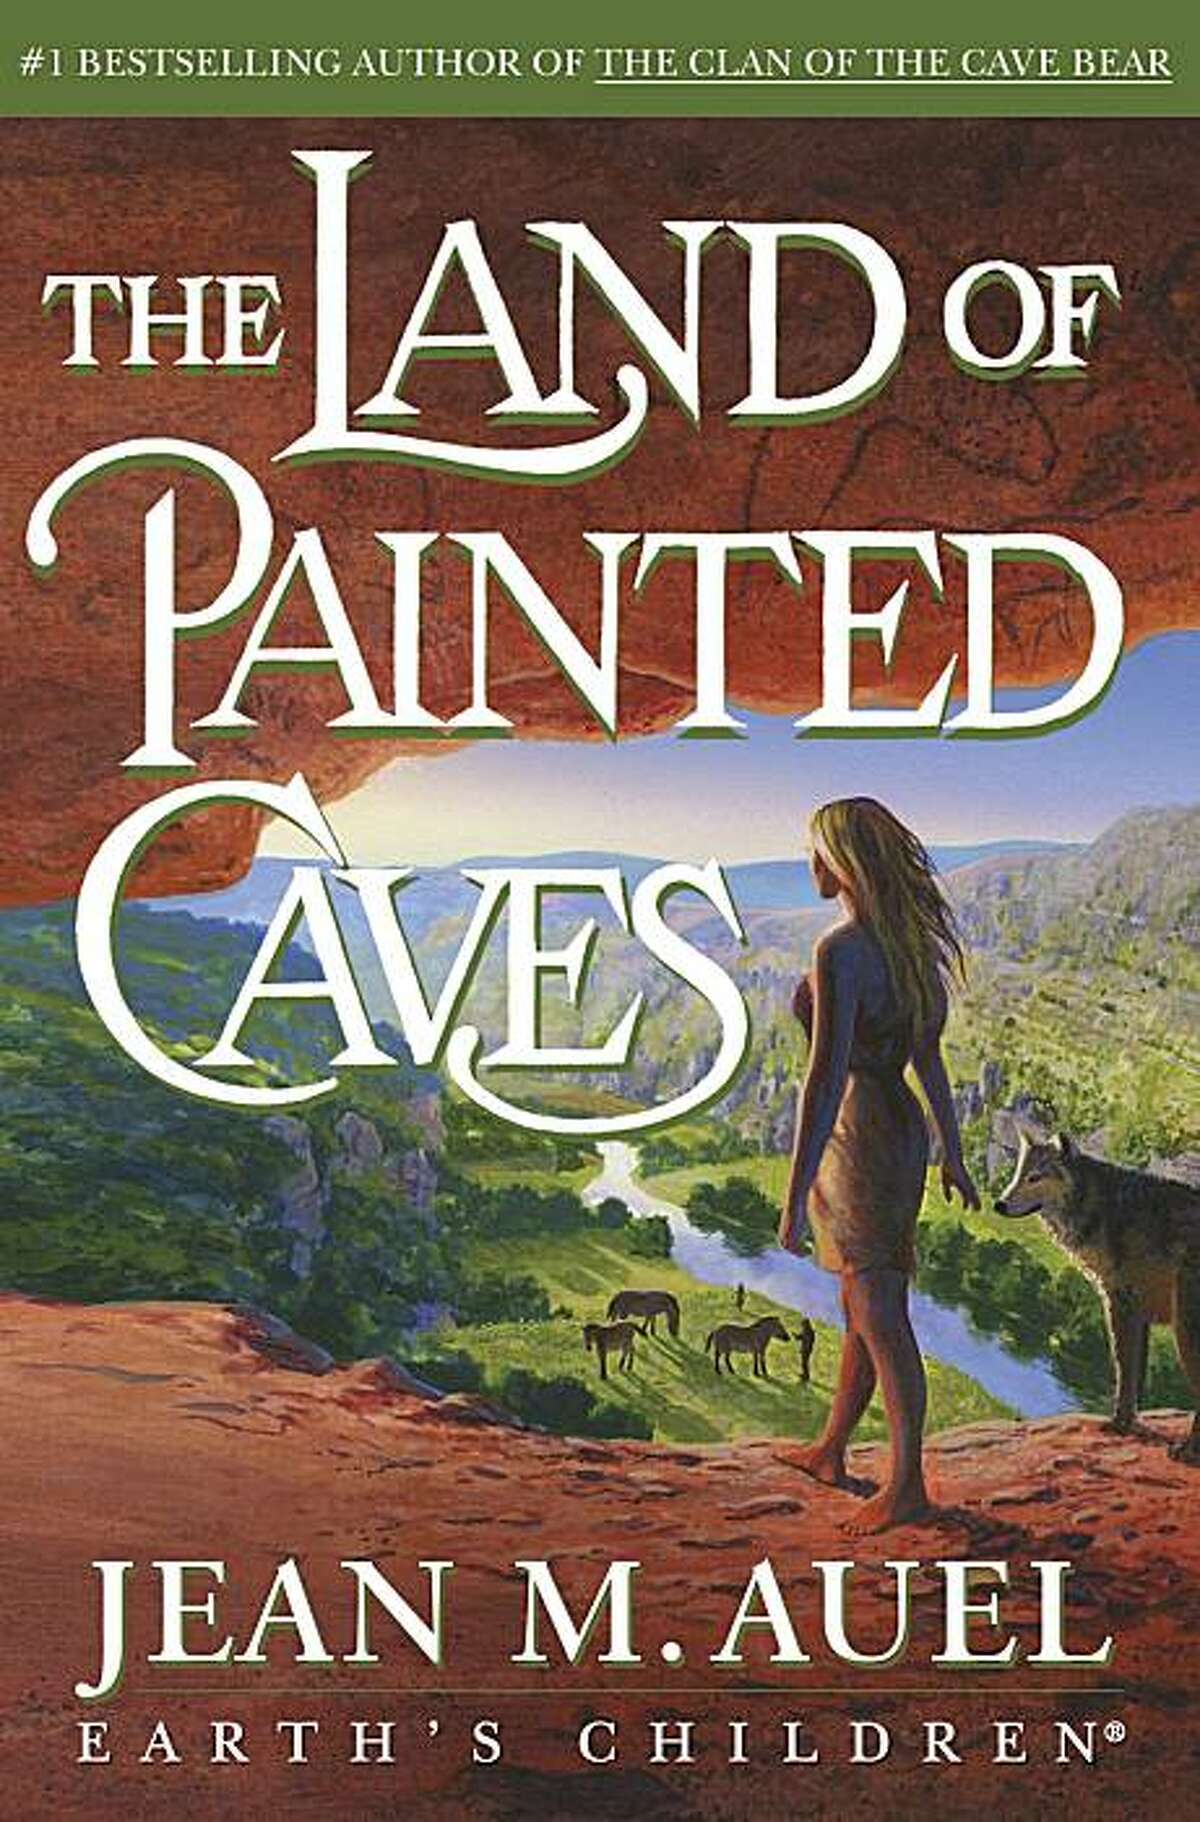 In this book cover image released by Crown Publishing, "The Land of Painted Caves," the sixth book in the "Earth's Children" series, is shown.